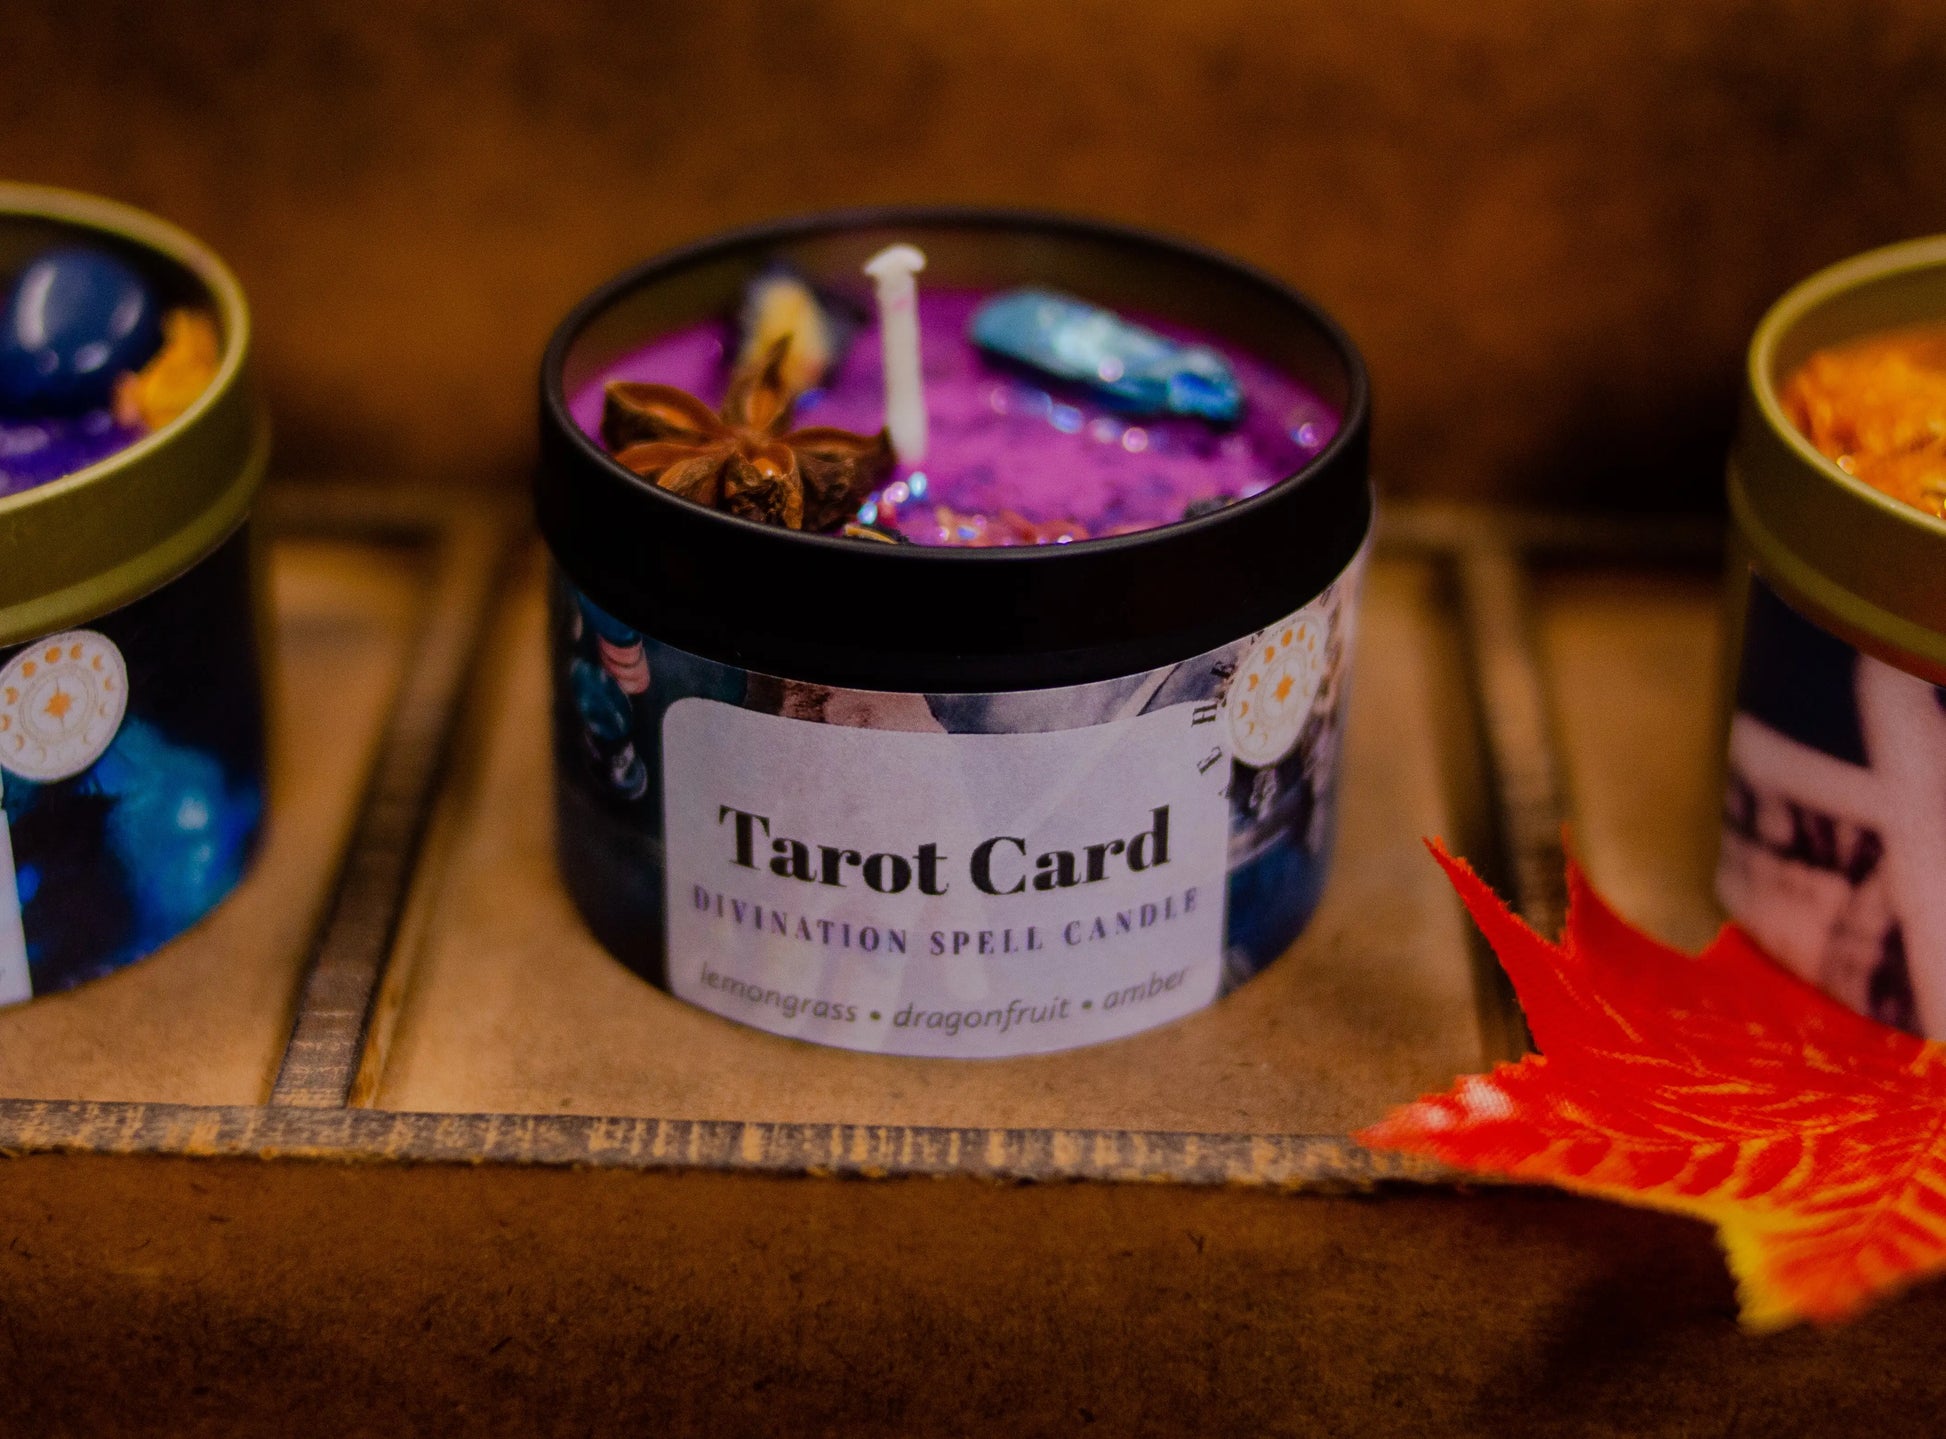 Tarot Card Divination Spell Candle - Spellbound